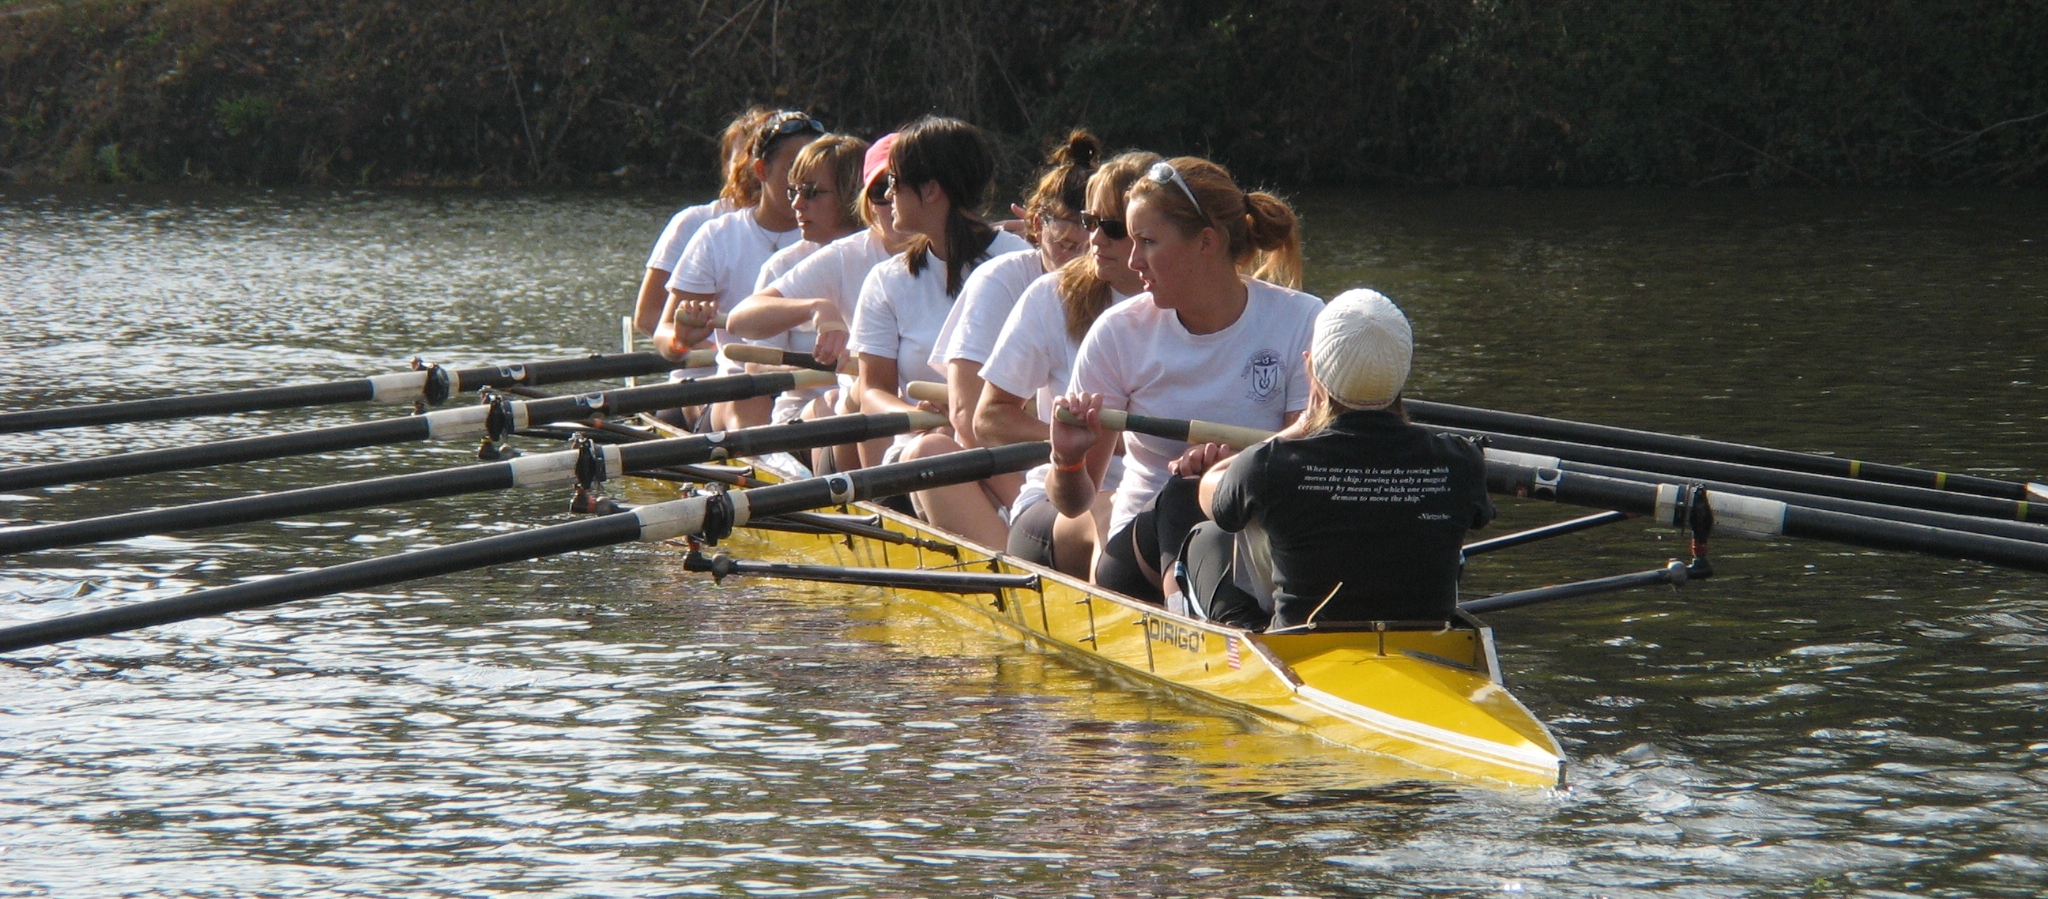 women are rowing a boat across a body of water